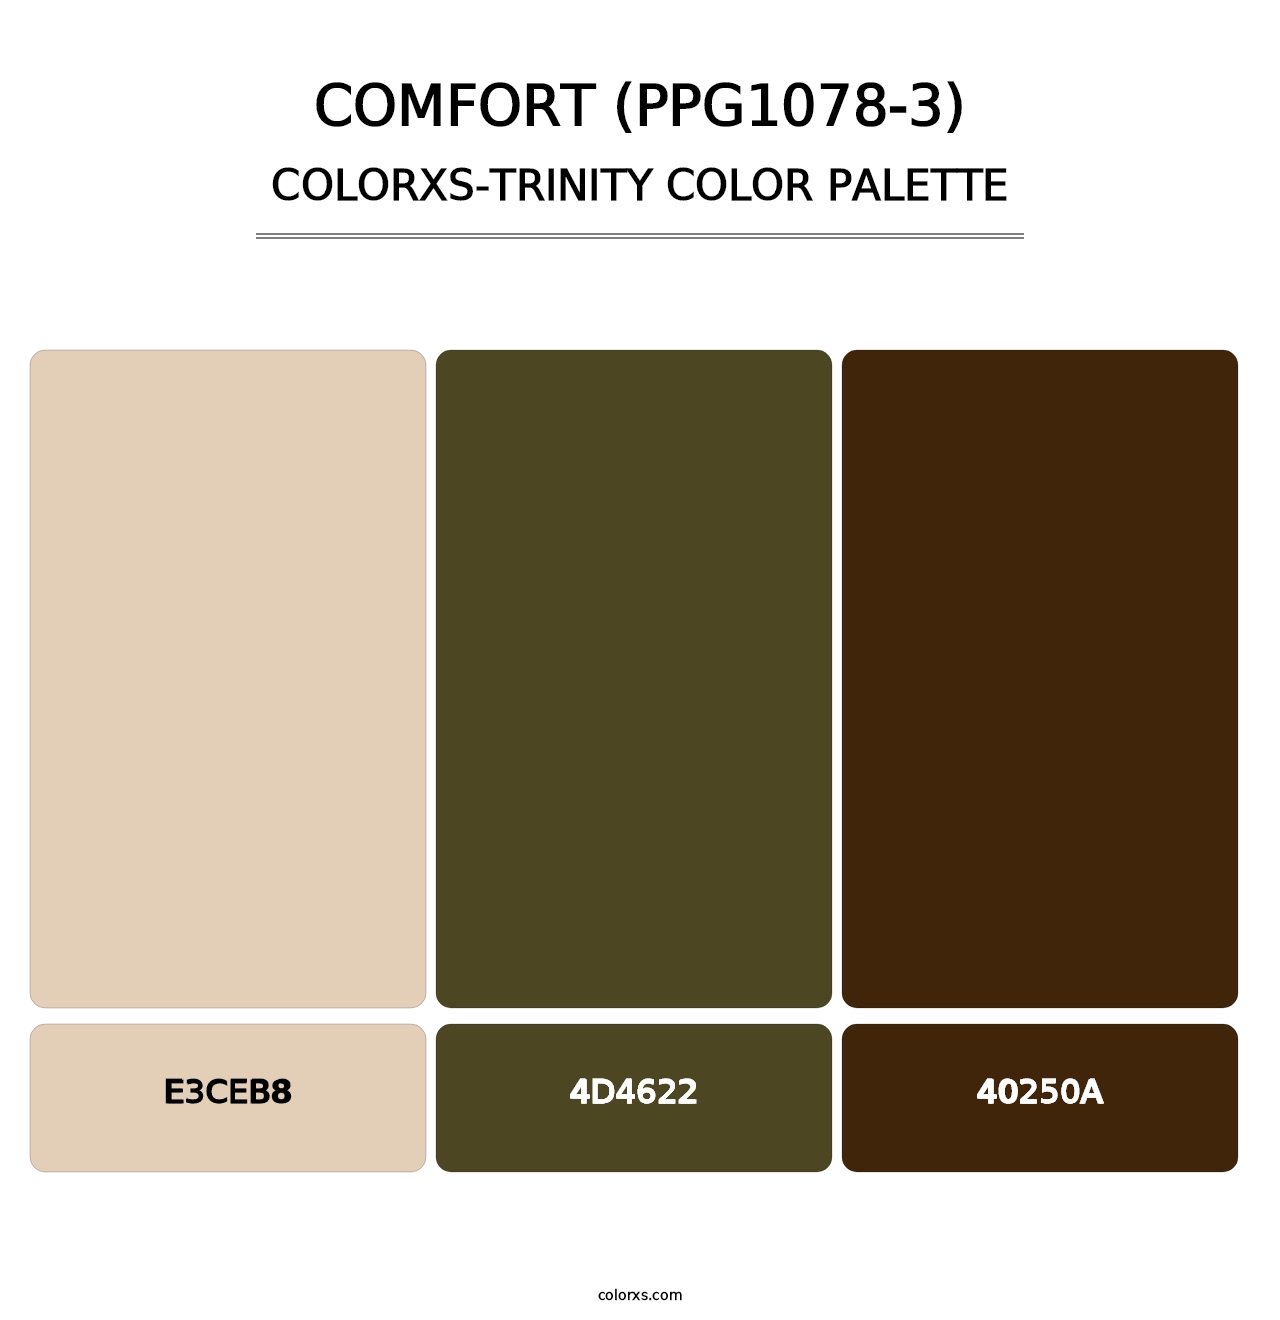 Comfort (PPG1078-3) - Colorxs Trinity Palette